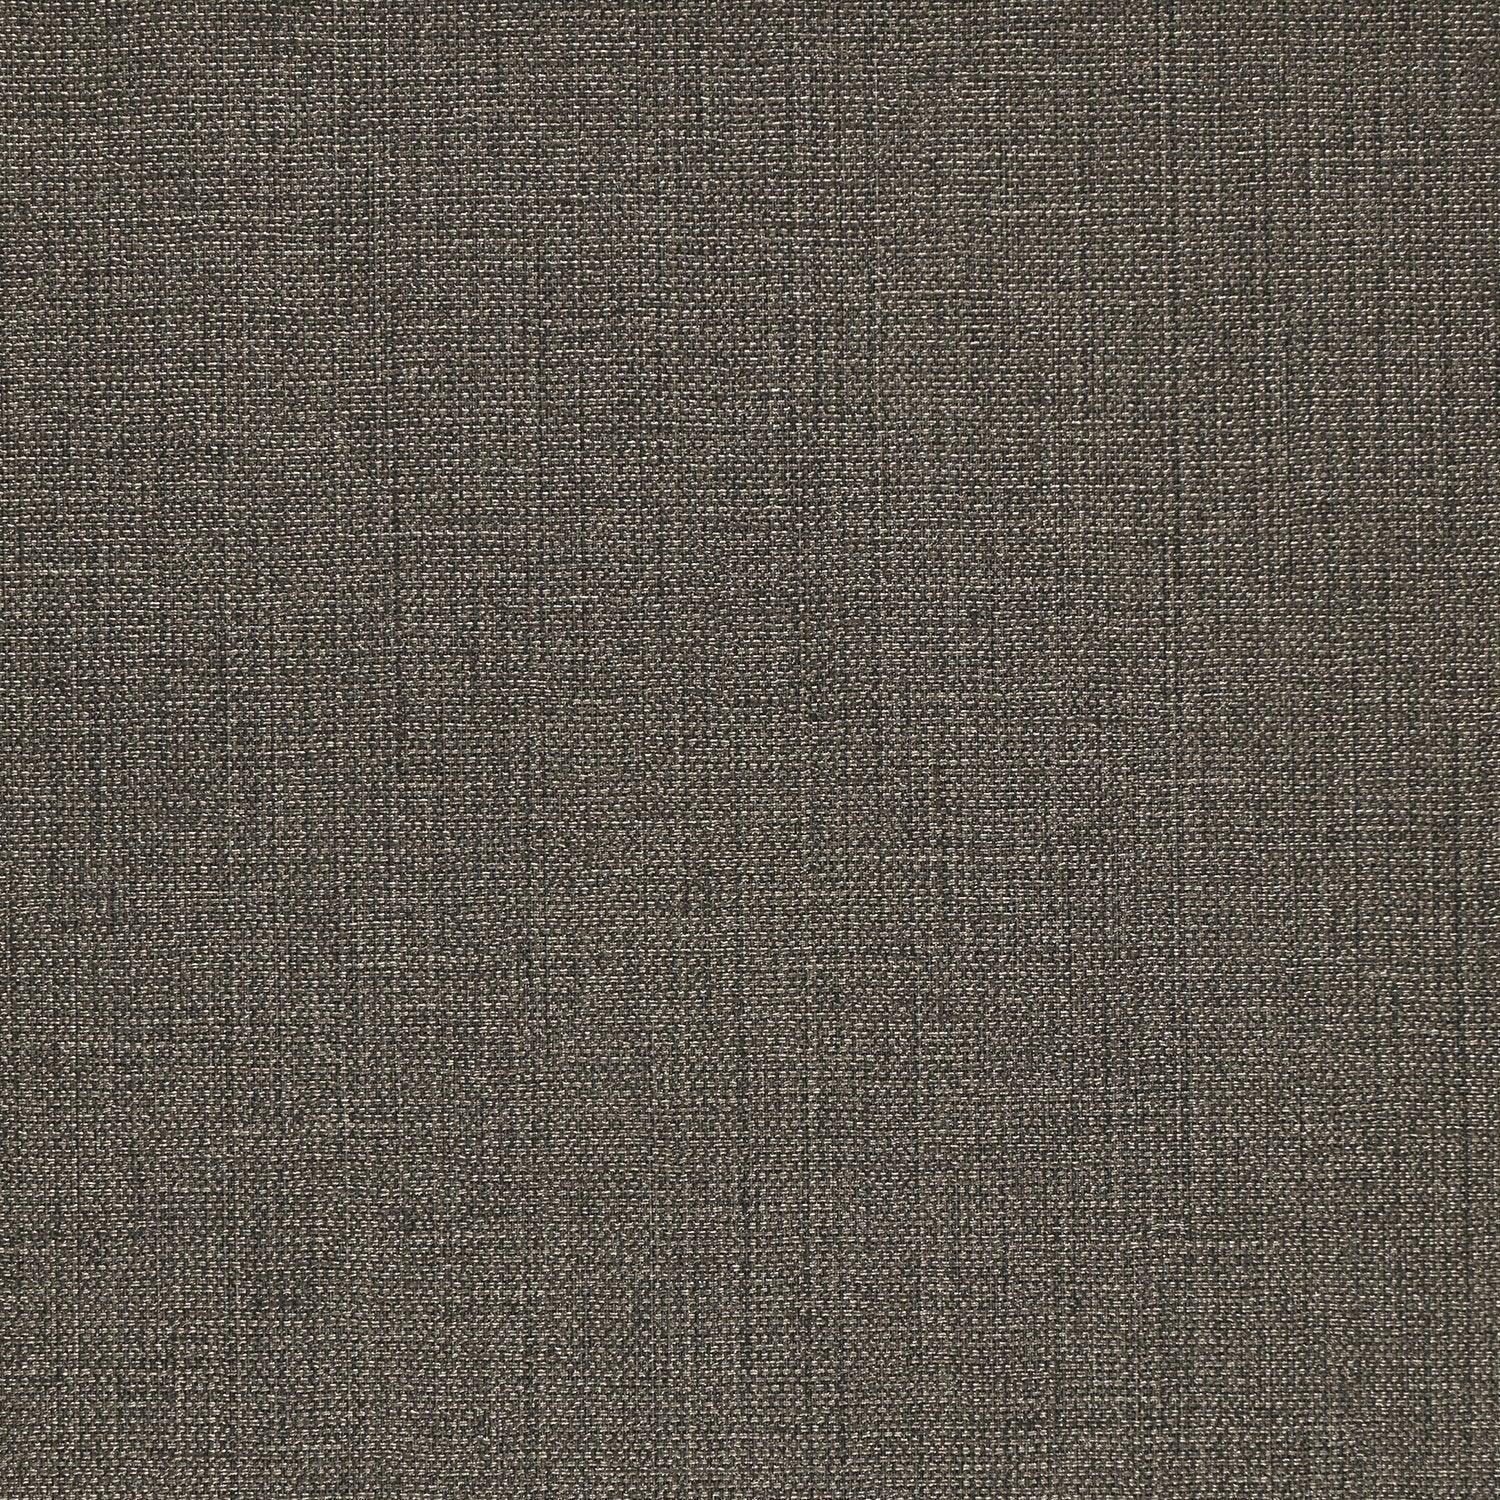 Panache - Y47515 - Wallcovering - Vycon - Kube Contract